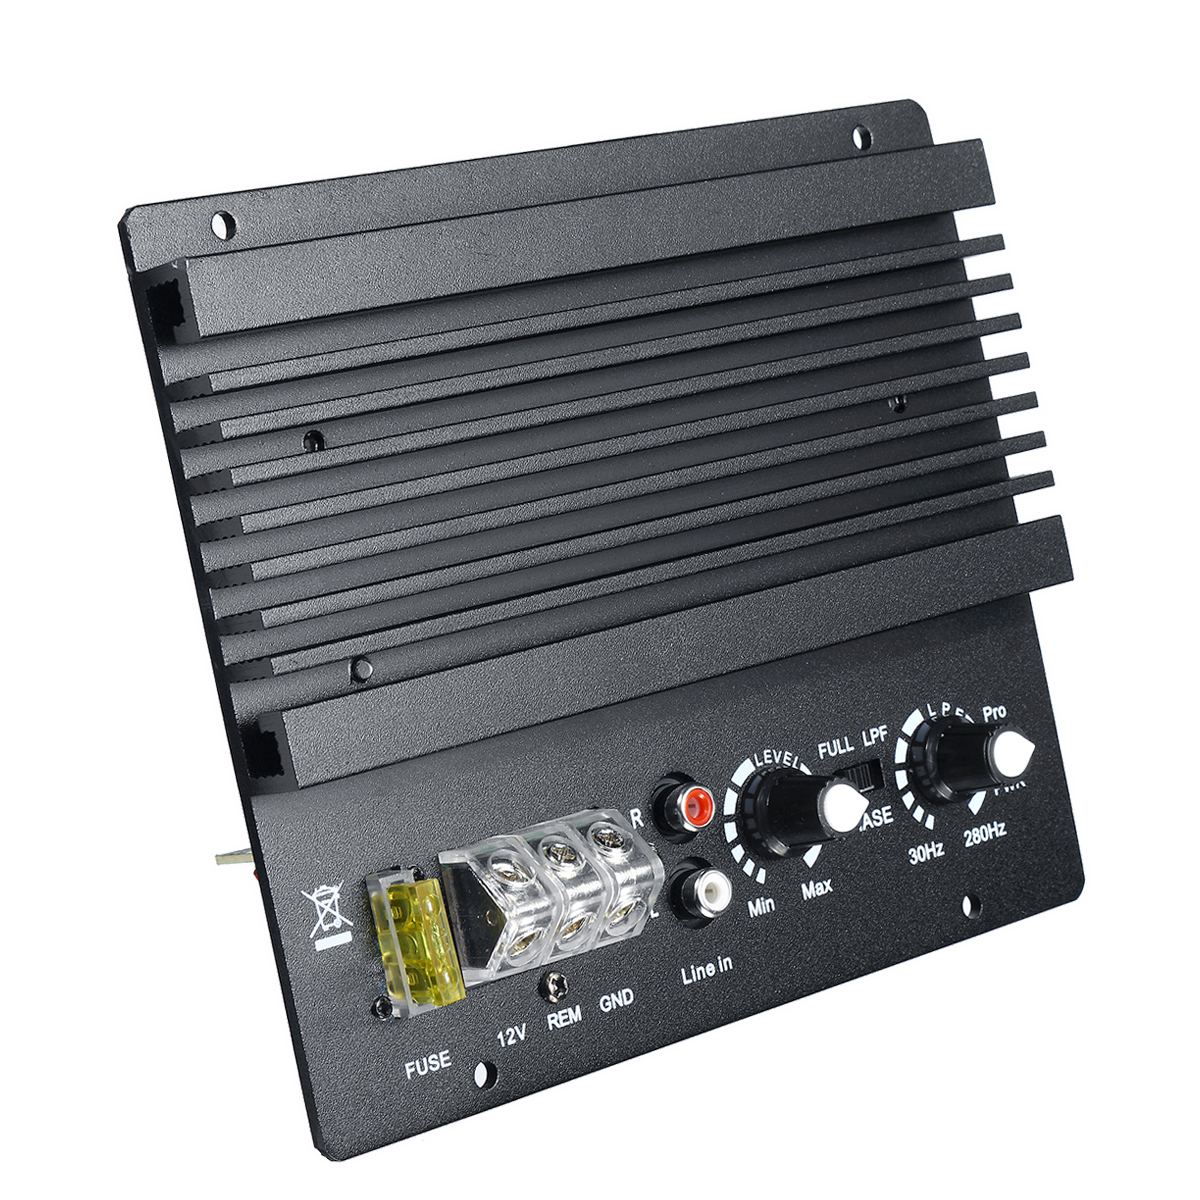 Power-Amplifier-Board-Powerful-Bass-Subwoofer-Amp-Amplify-Module-12V-300W-for-Car-Audio-Stereo-1428313